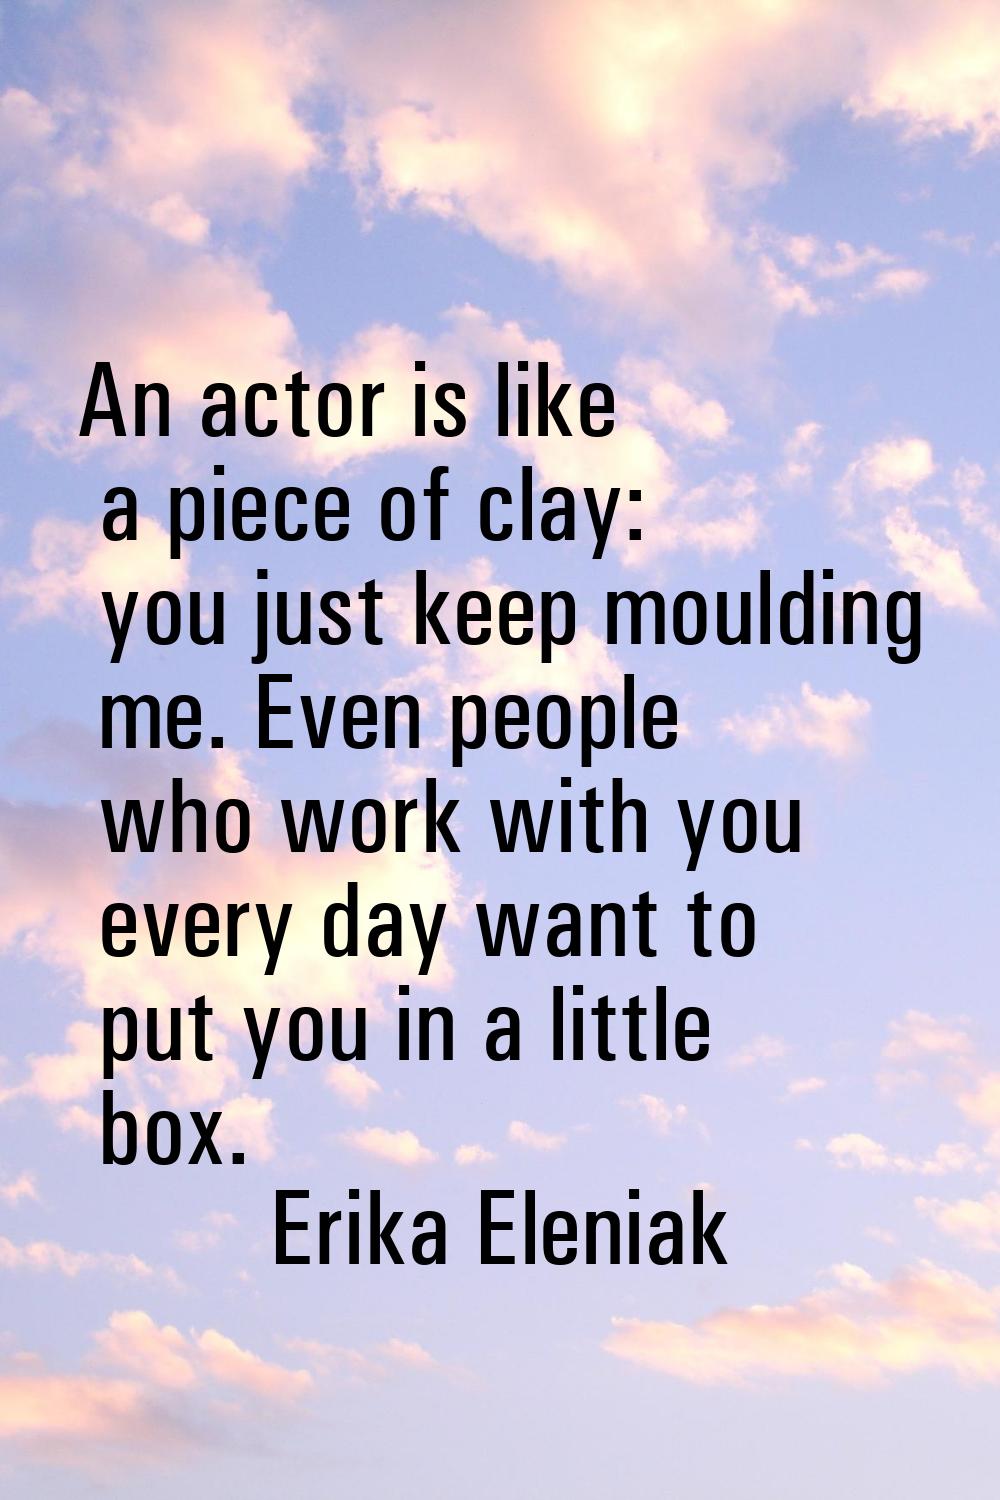 An actor is like a piece of clay: you just keep moulding me. Even people who work with you every da